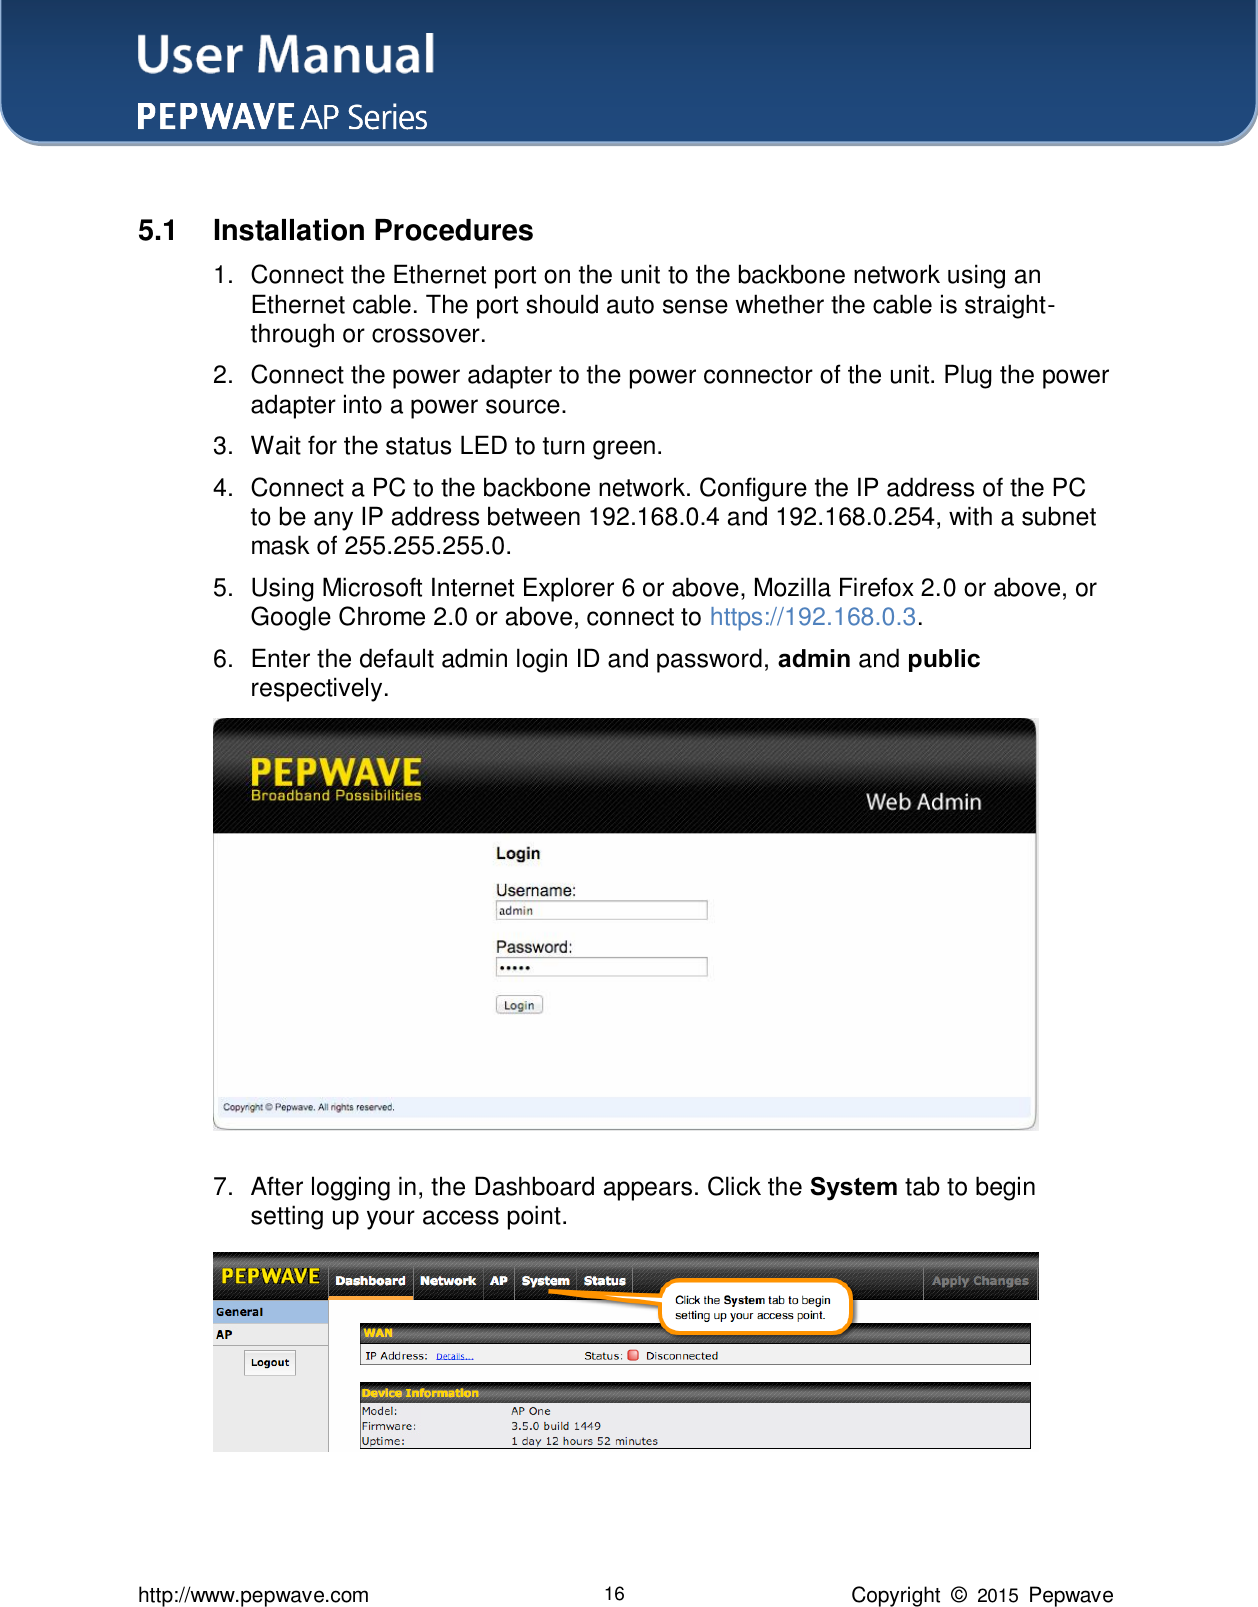 User Manual    http://www.pepwave.com 16 Copyright  ©  2015  Pepwave  5.1  Installation Procedures 1.  Connect the Ethernet port on the unit to the backbone network using an Ethernet cable. The port should auto sense whether the cable is straight-through or crossover.   2.  Connect the power adapter to the power connector of the unit. Plug the power adapter into a power source.   3.  Wait for the status LED to turn green.   4.  Connect a PC to the backbone network. Configure the IP address of the PC to be any IP address between 192.168.0.4 and 192.168.0.254, with a subnet mask of 255.255.255.0.   5.  Using Microsoft Internet Explorer 6 or above, Mozilla Firefox 2.0 or above, or Google Chrome 2.0 or above, connect to https://192.168.0.3. 6.  Enter the default admin login ID and password, admin and public respectively.  7.  After logging in, the Dashboard appears. Click the System tab to begin setting up your access point.  